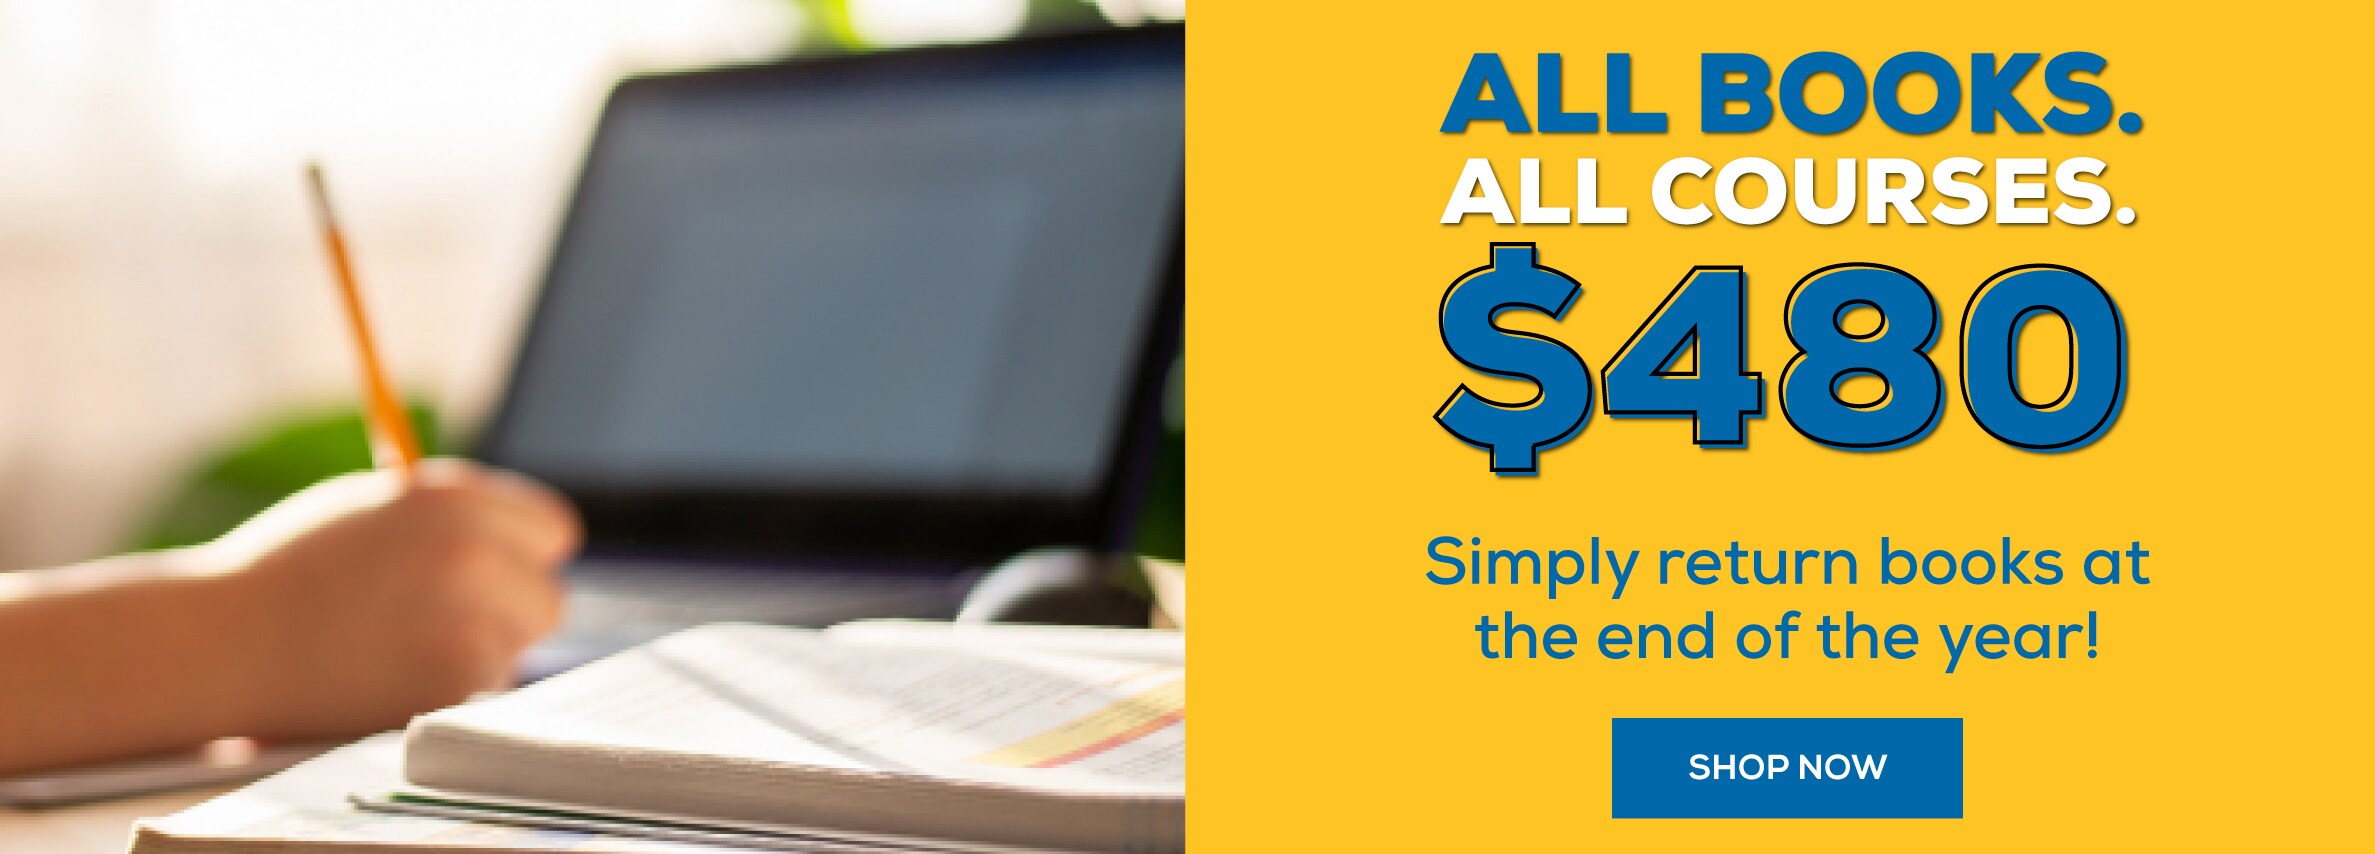 All Books. All Courses.  $480. Simply return books at the end of the year! Shop now